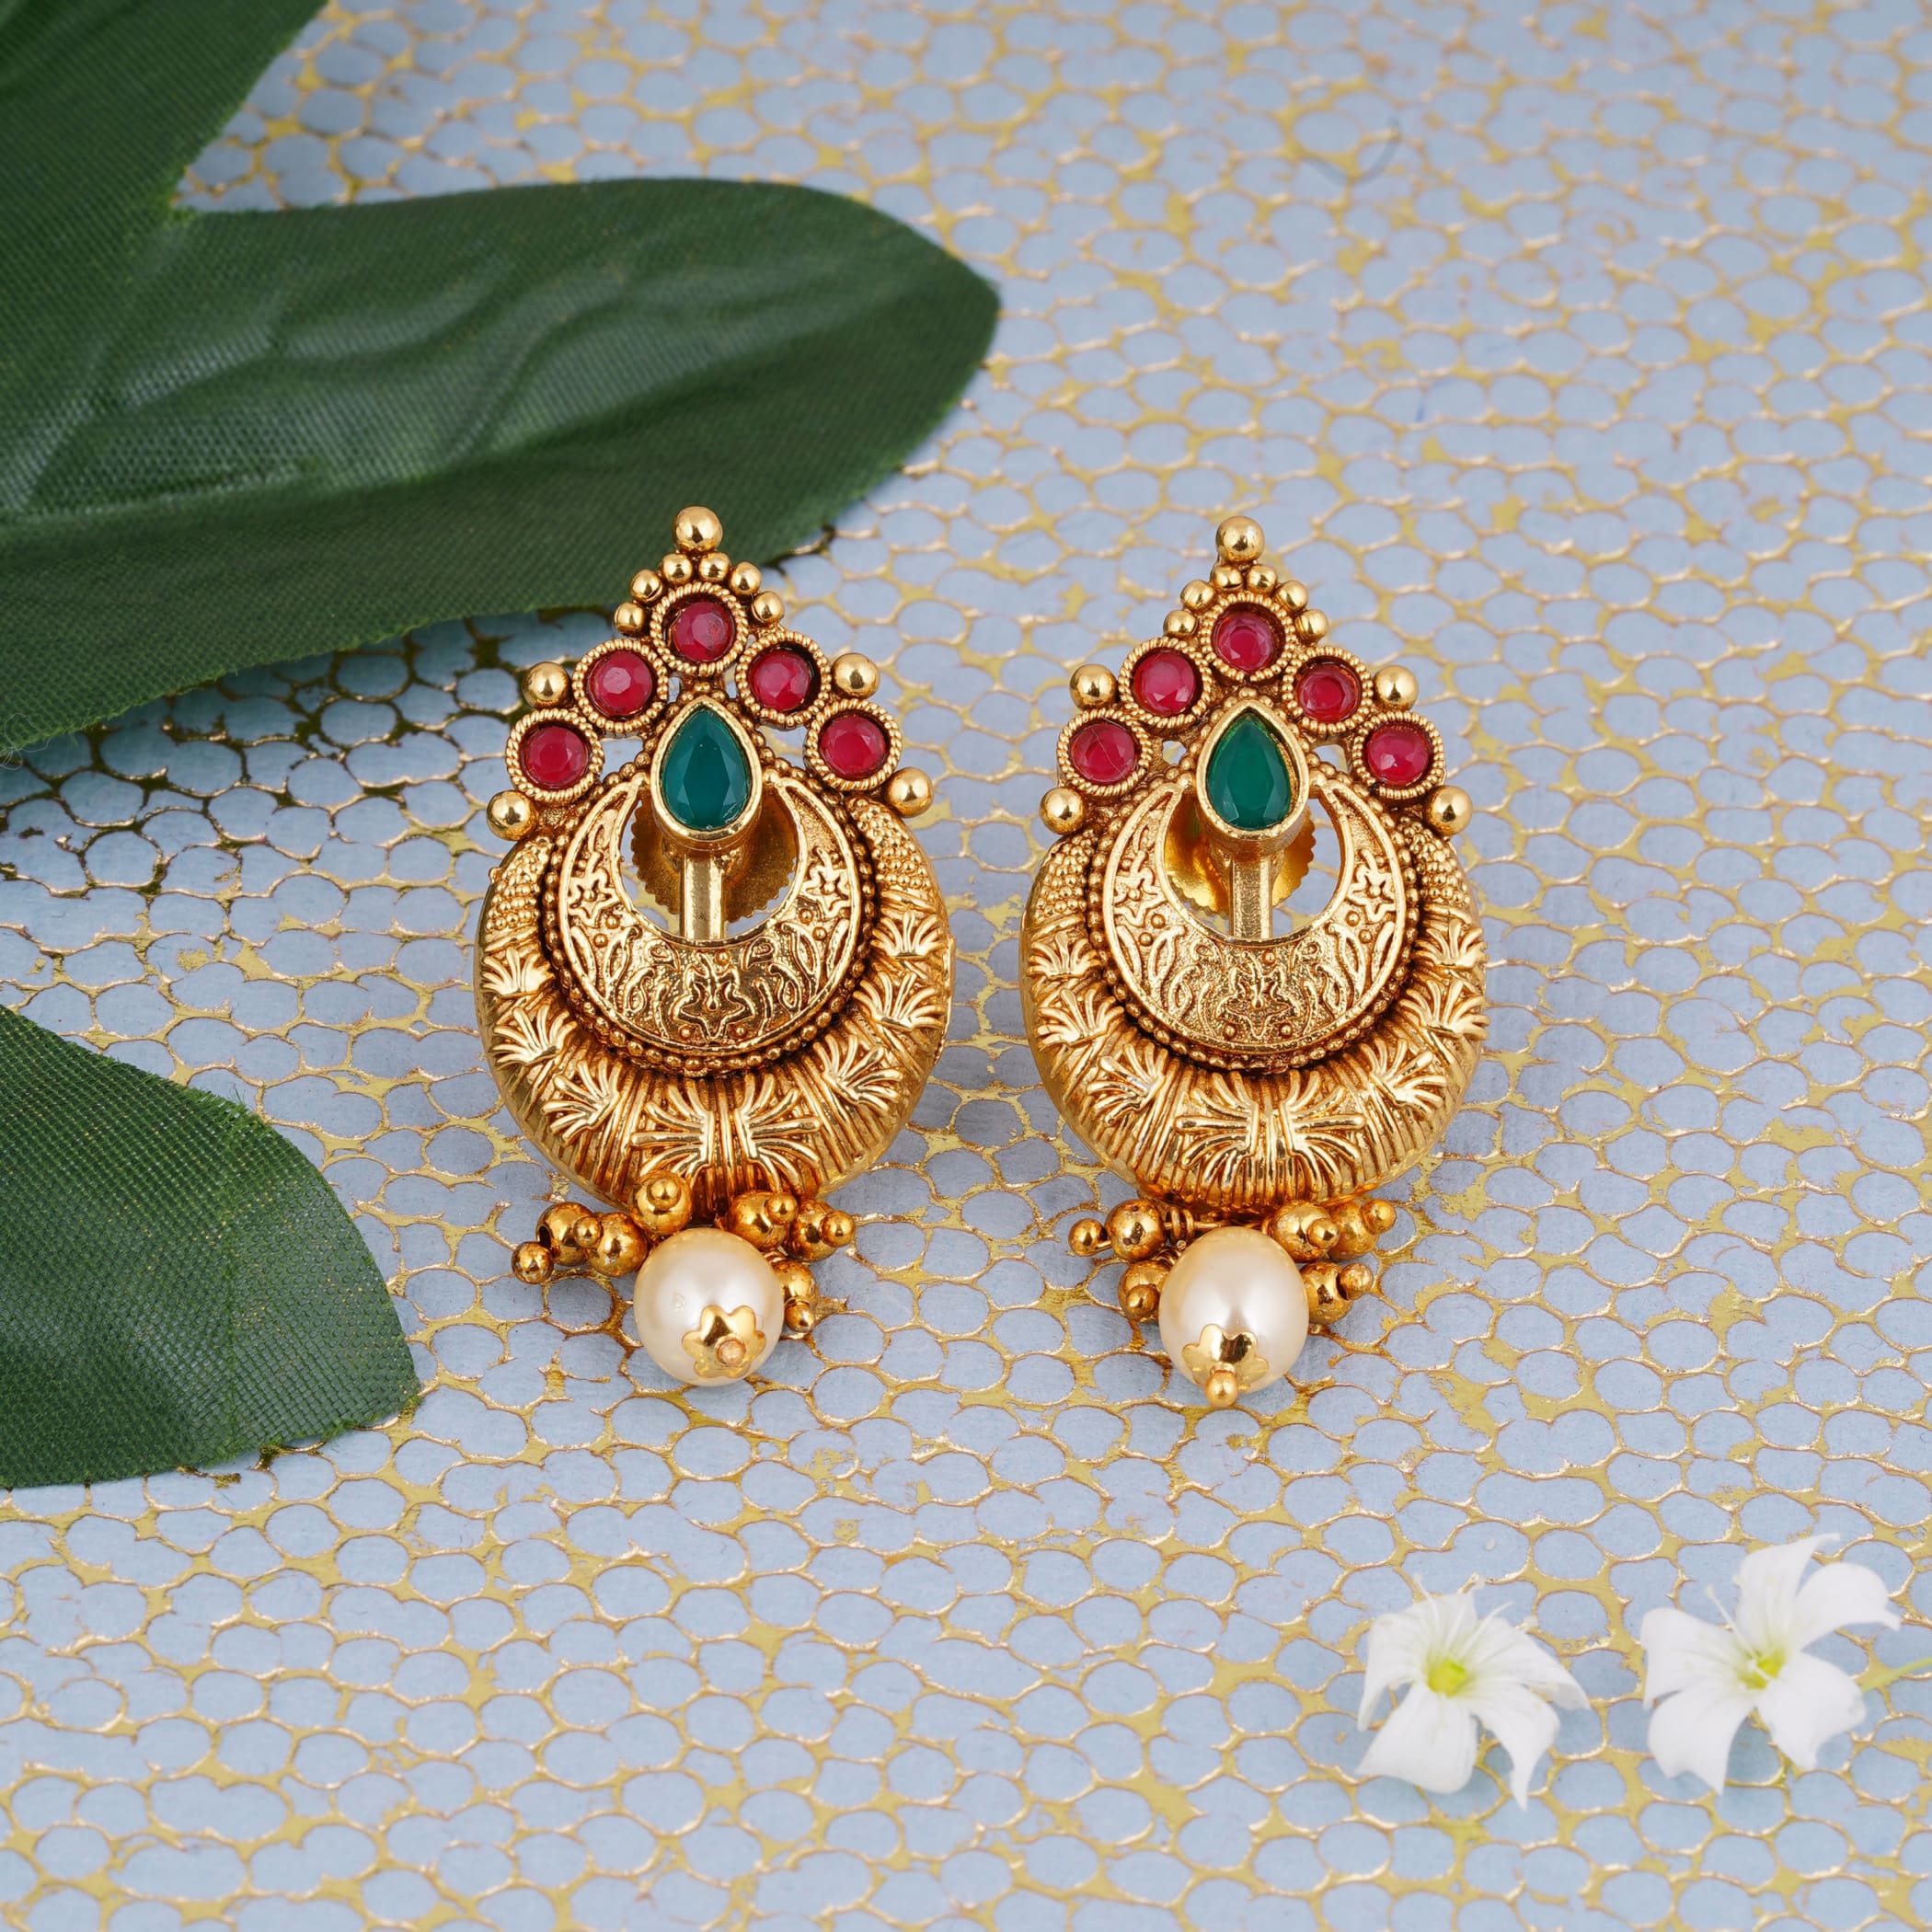 Ethnic chandelier earrings gold plated traditional south